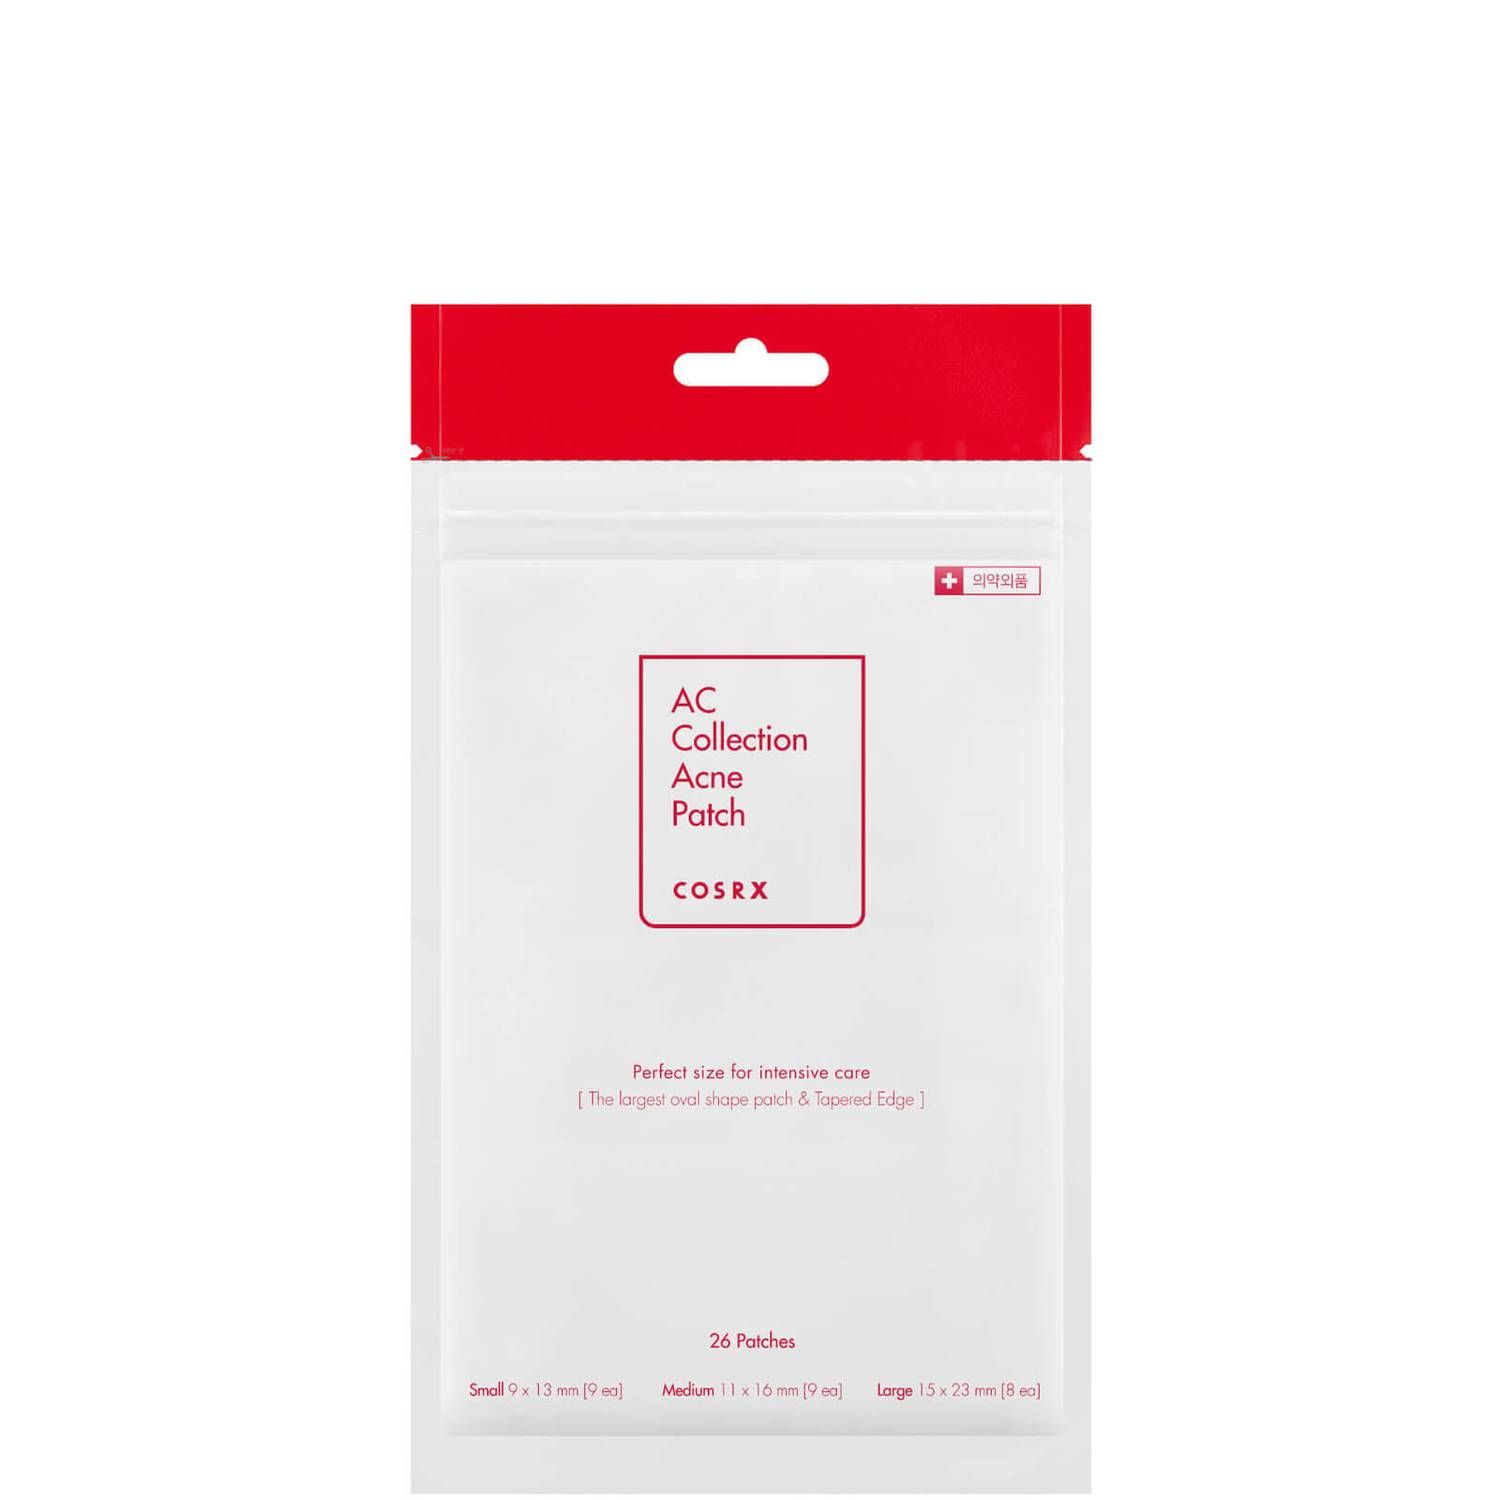 COSRX AC Collection Acne Patch (26 Patches) | Look Fantastic (UK)